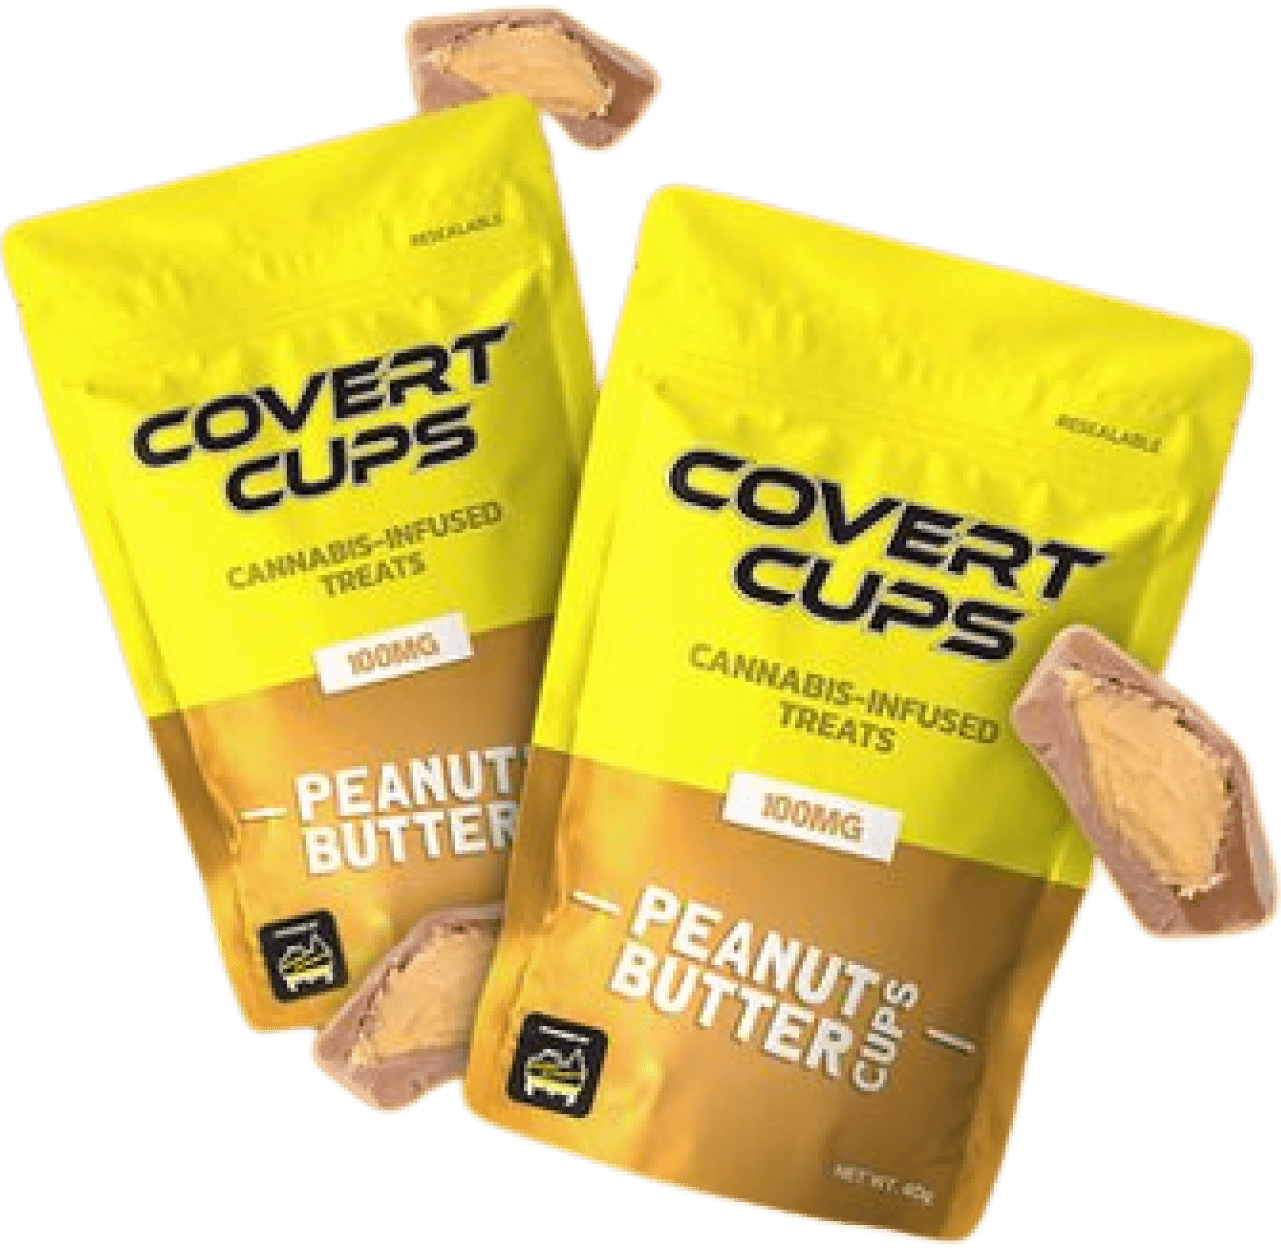 Covert Cups product image of chocolate treats